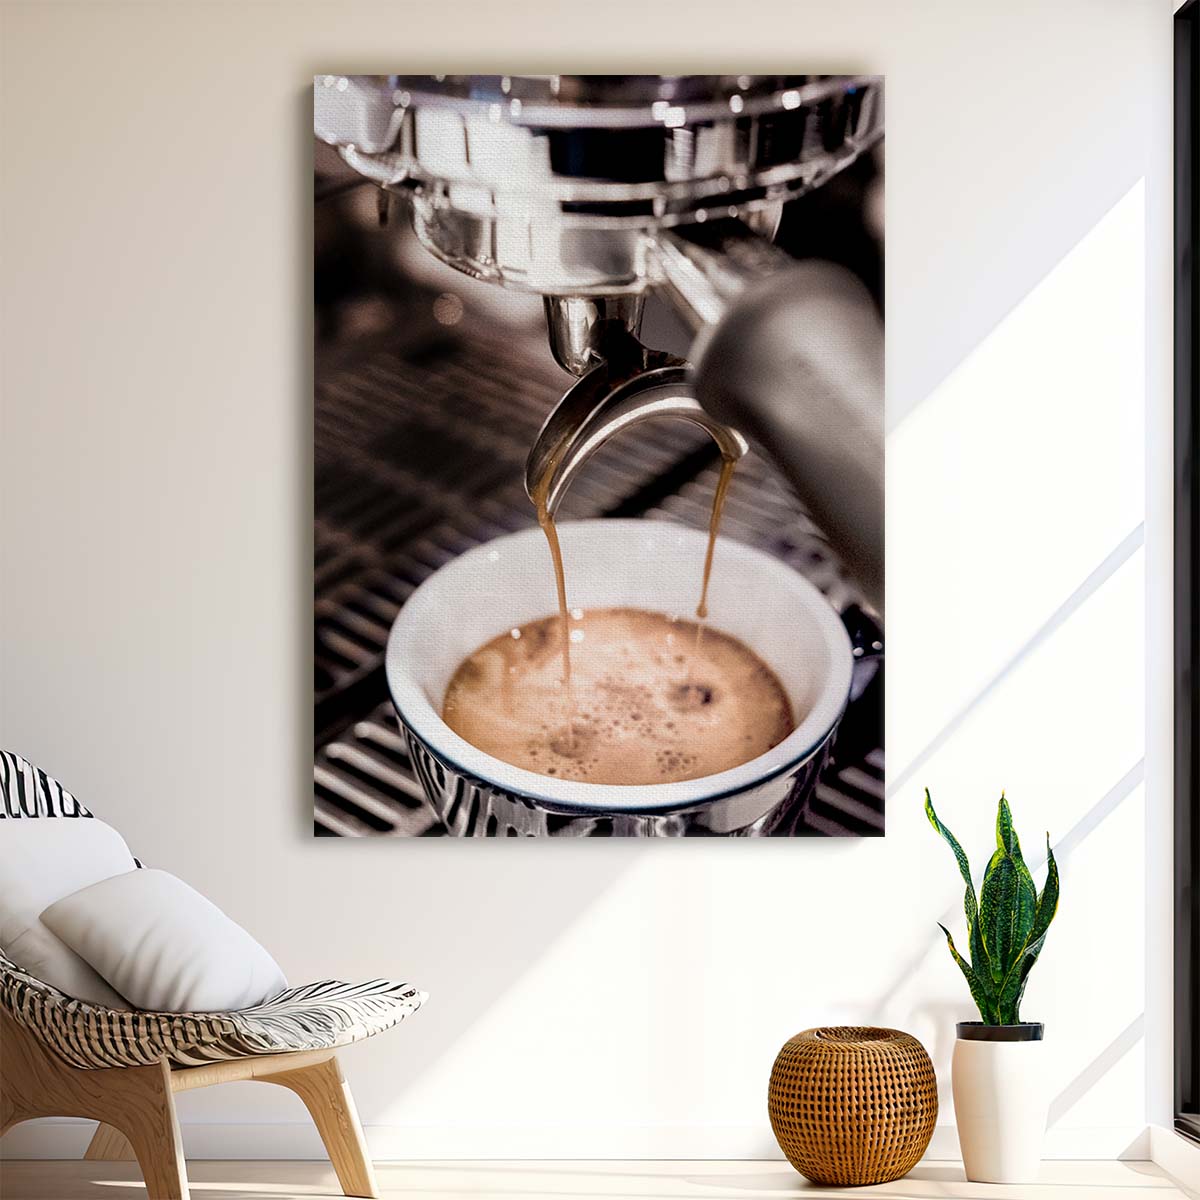 Barista's Espresso Drip Coffee Cup, Still-Life Photography Art by Luxuriance Designs, made in USA